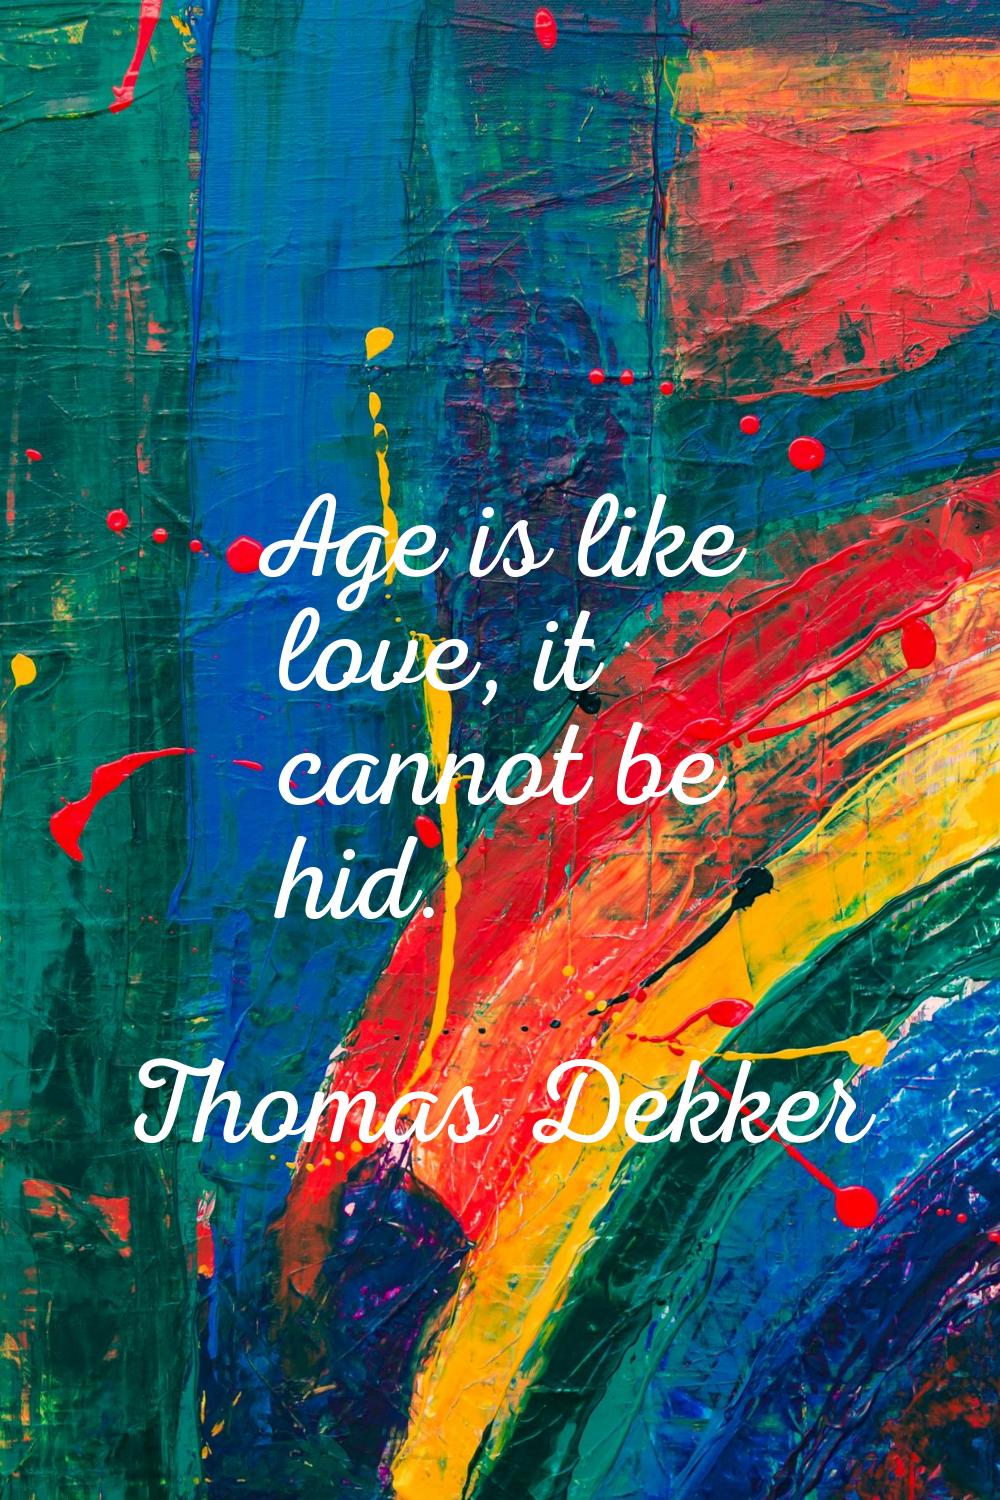 Age is like love, it cannot be hid.